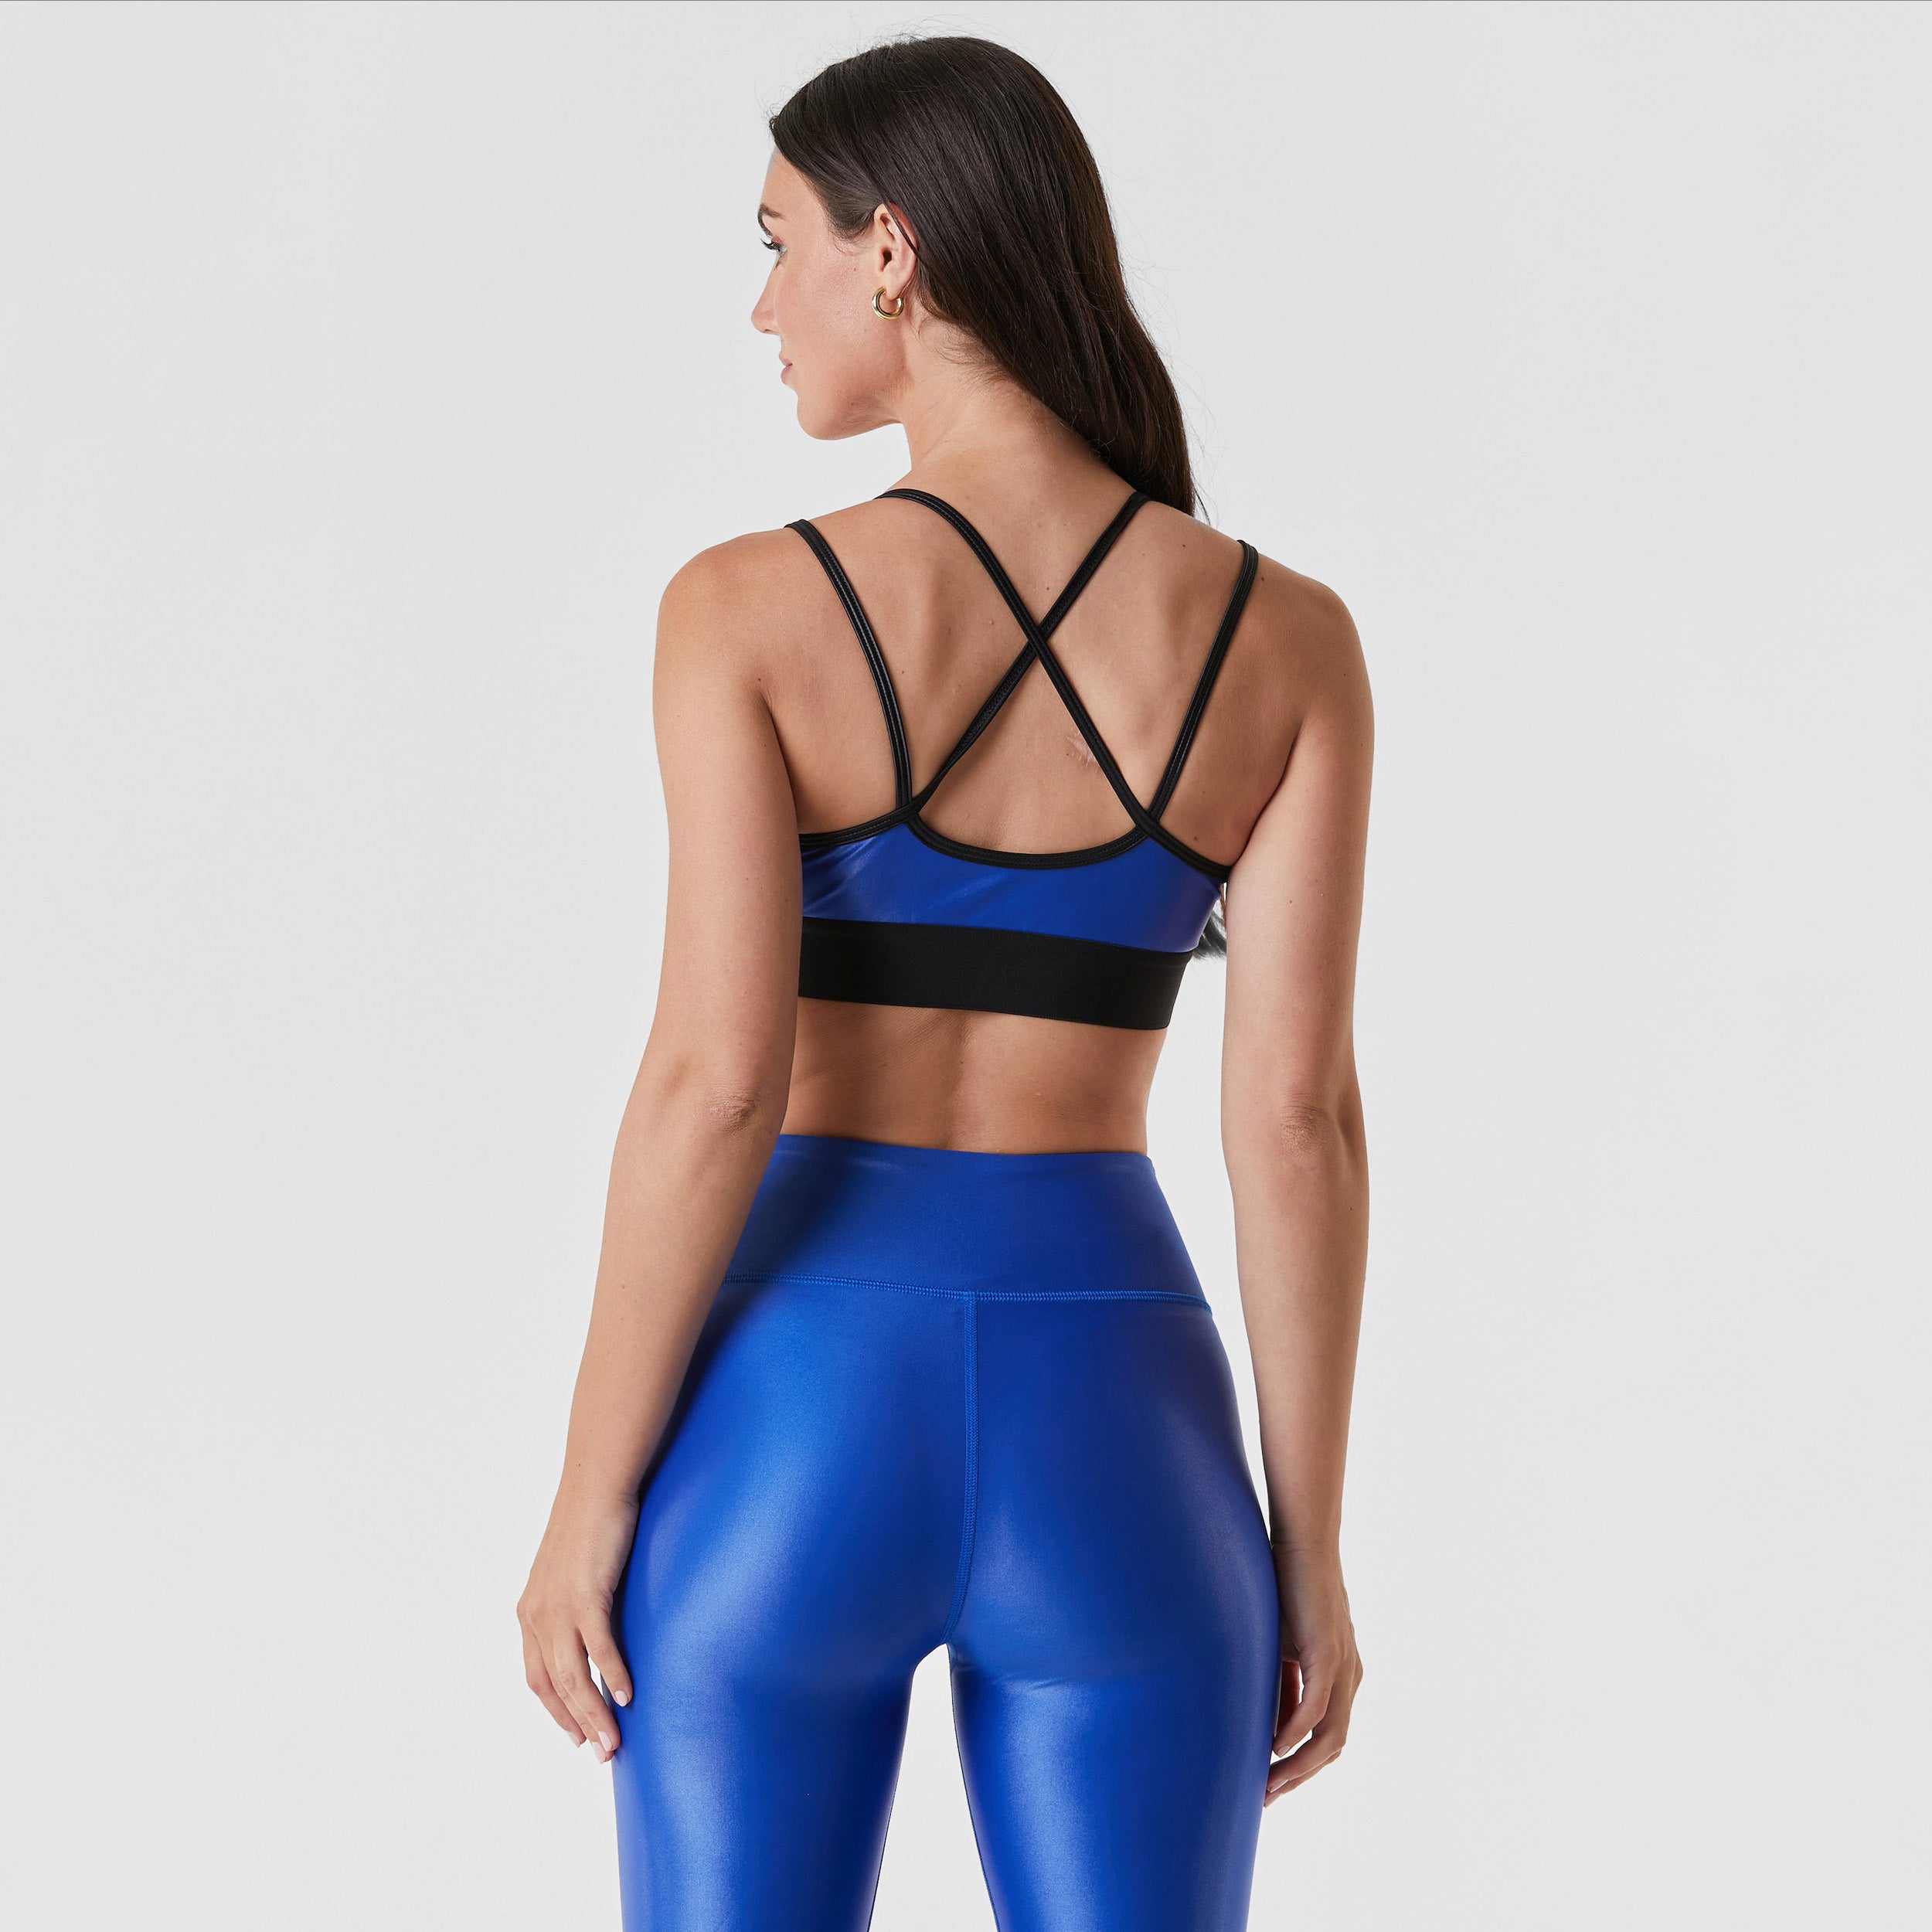 Rear view of woman wearing cobalt blue gloss liquid sports bra featuring a scoop neckline and an alluring strappy back with a supportive elastic band